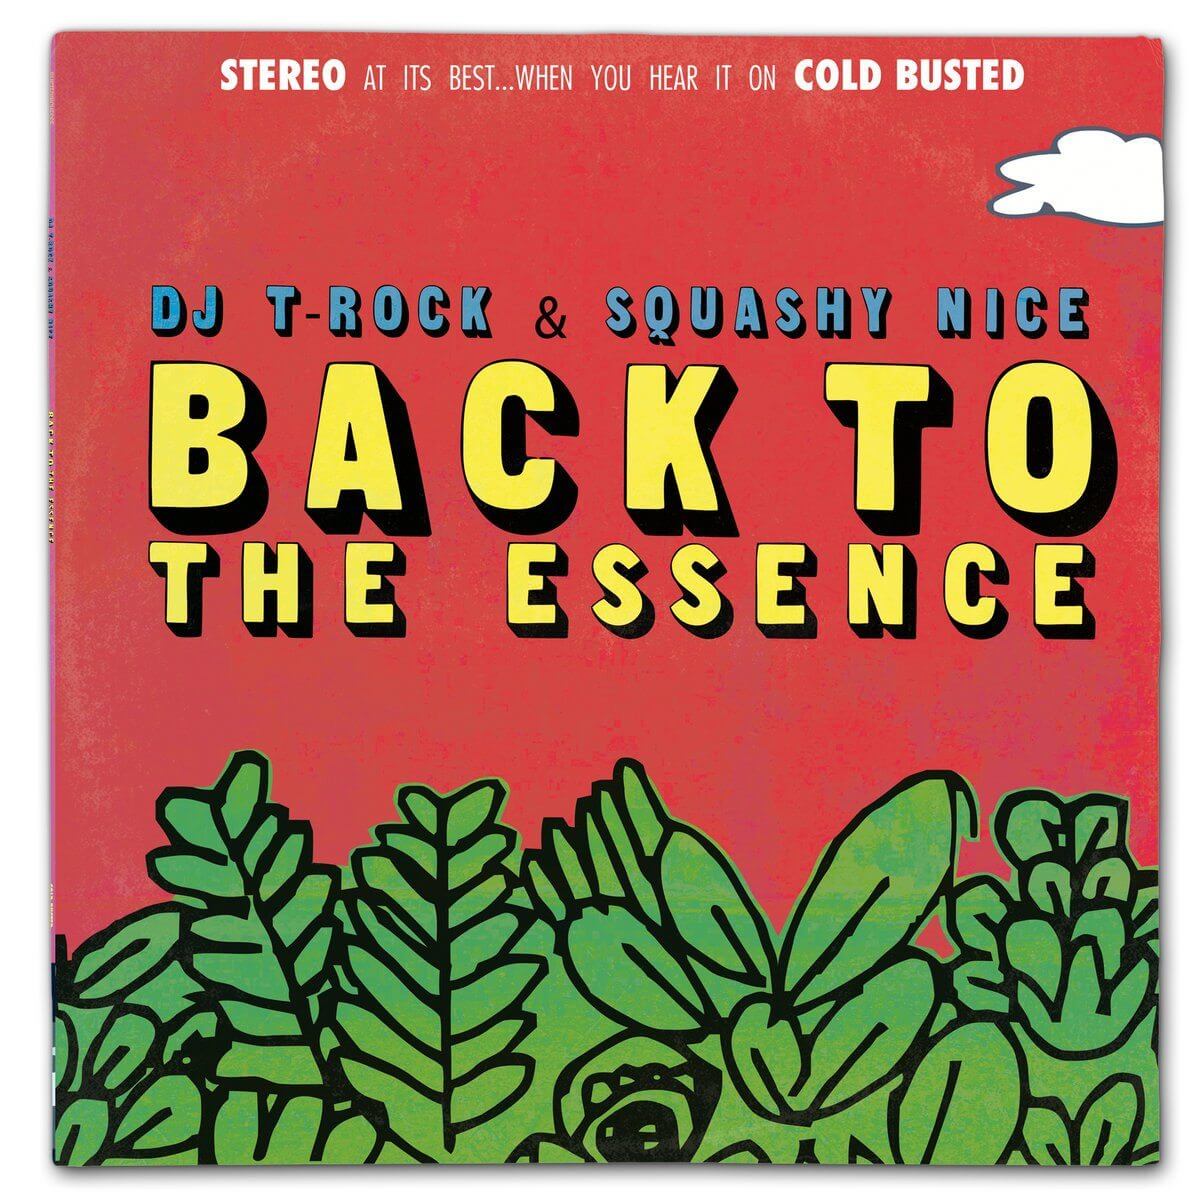 DJ T-Rock & Squashy Nice - Back To The Essence - Limited Edition 12 Inch Vinyl - Cold Busted